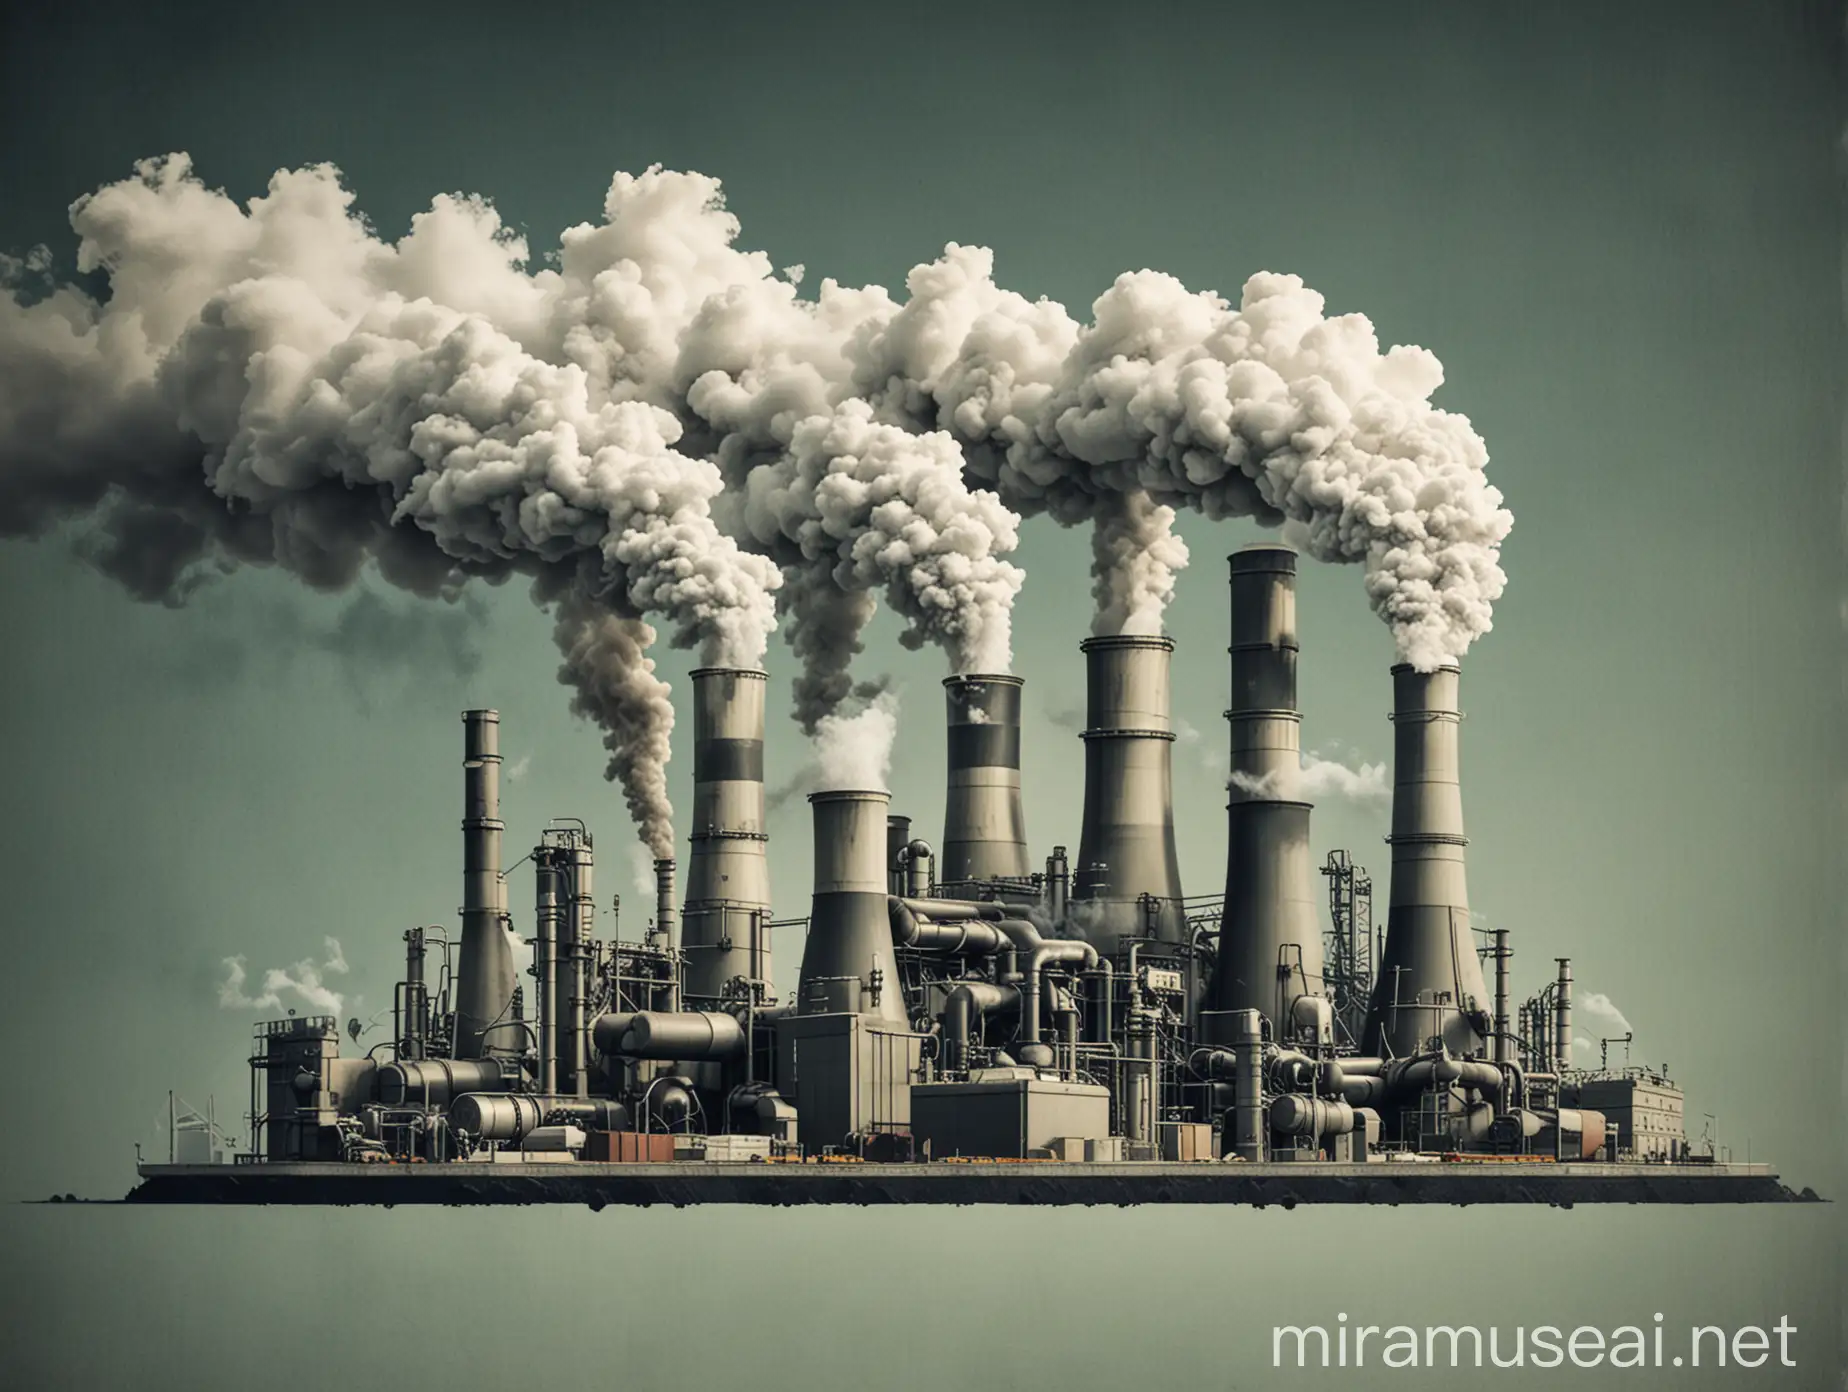 Industrial Carbon Dioxide Emission Pollution from Manufacturing Processes